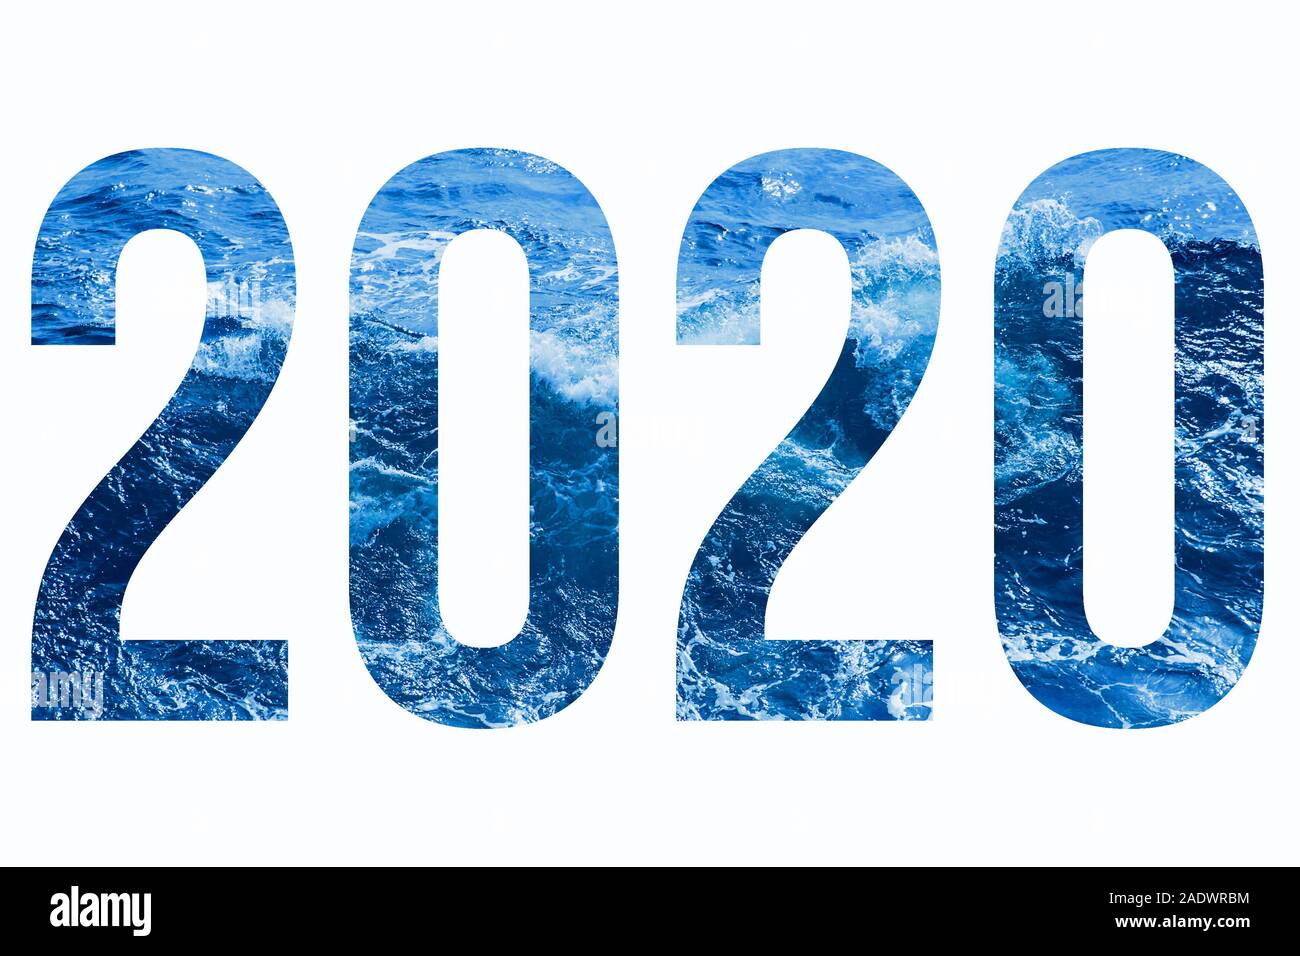 Blue sea waves as texture for digits 2020 symbol of the year. Stock Photo